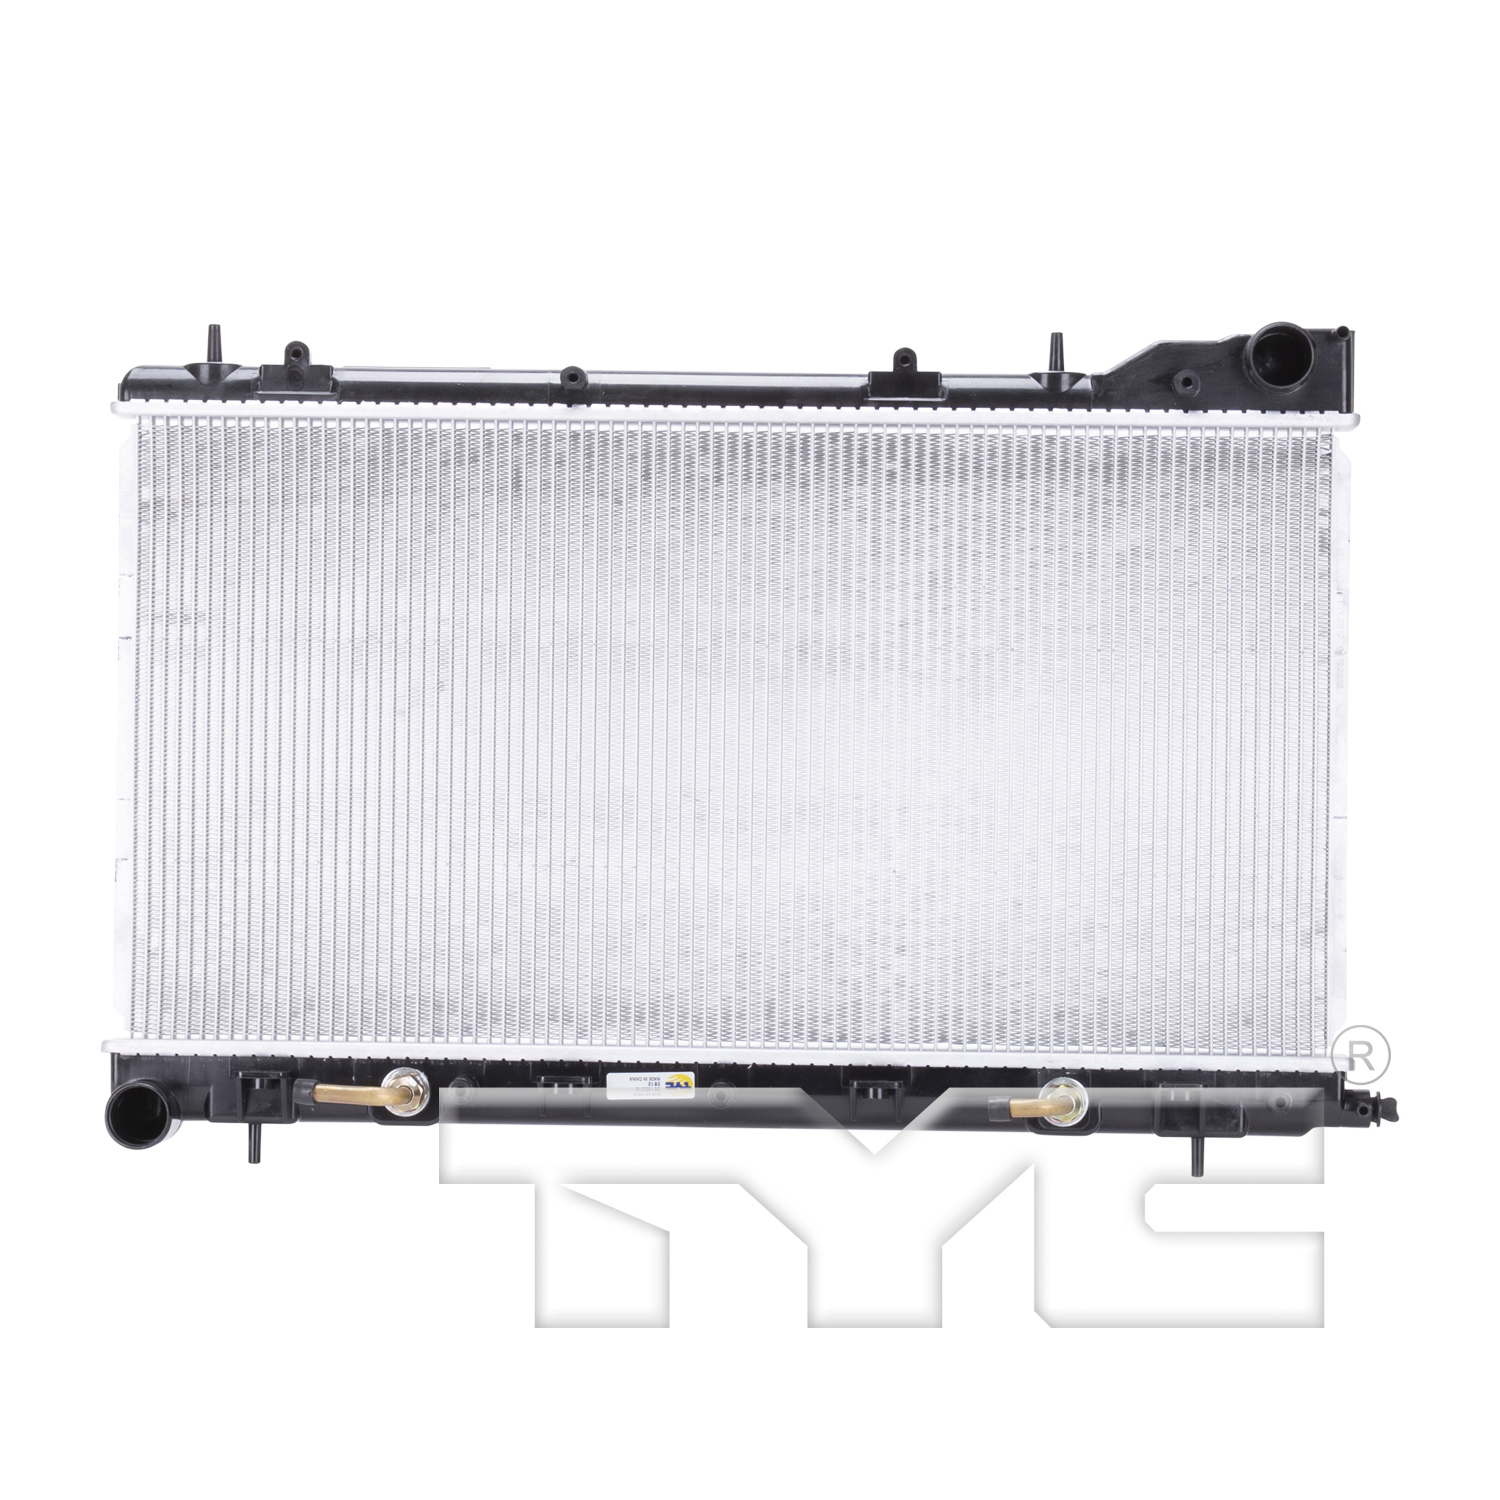 Aftermarket RADIATORS for SUBARU - FORESTER, FORESTER,04-05,Radiator assembly